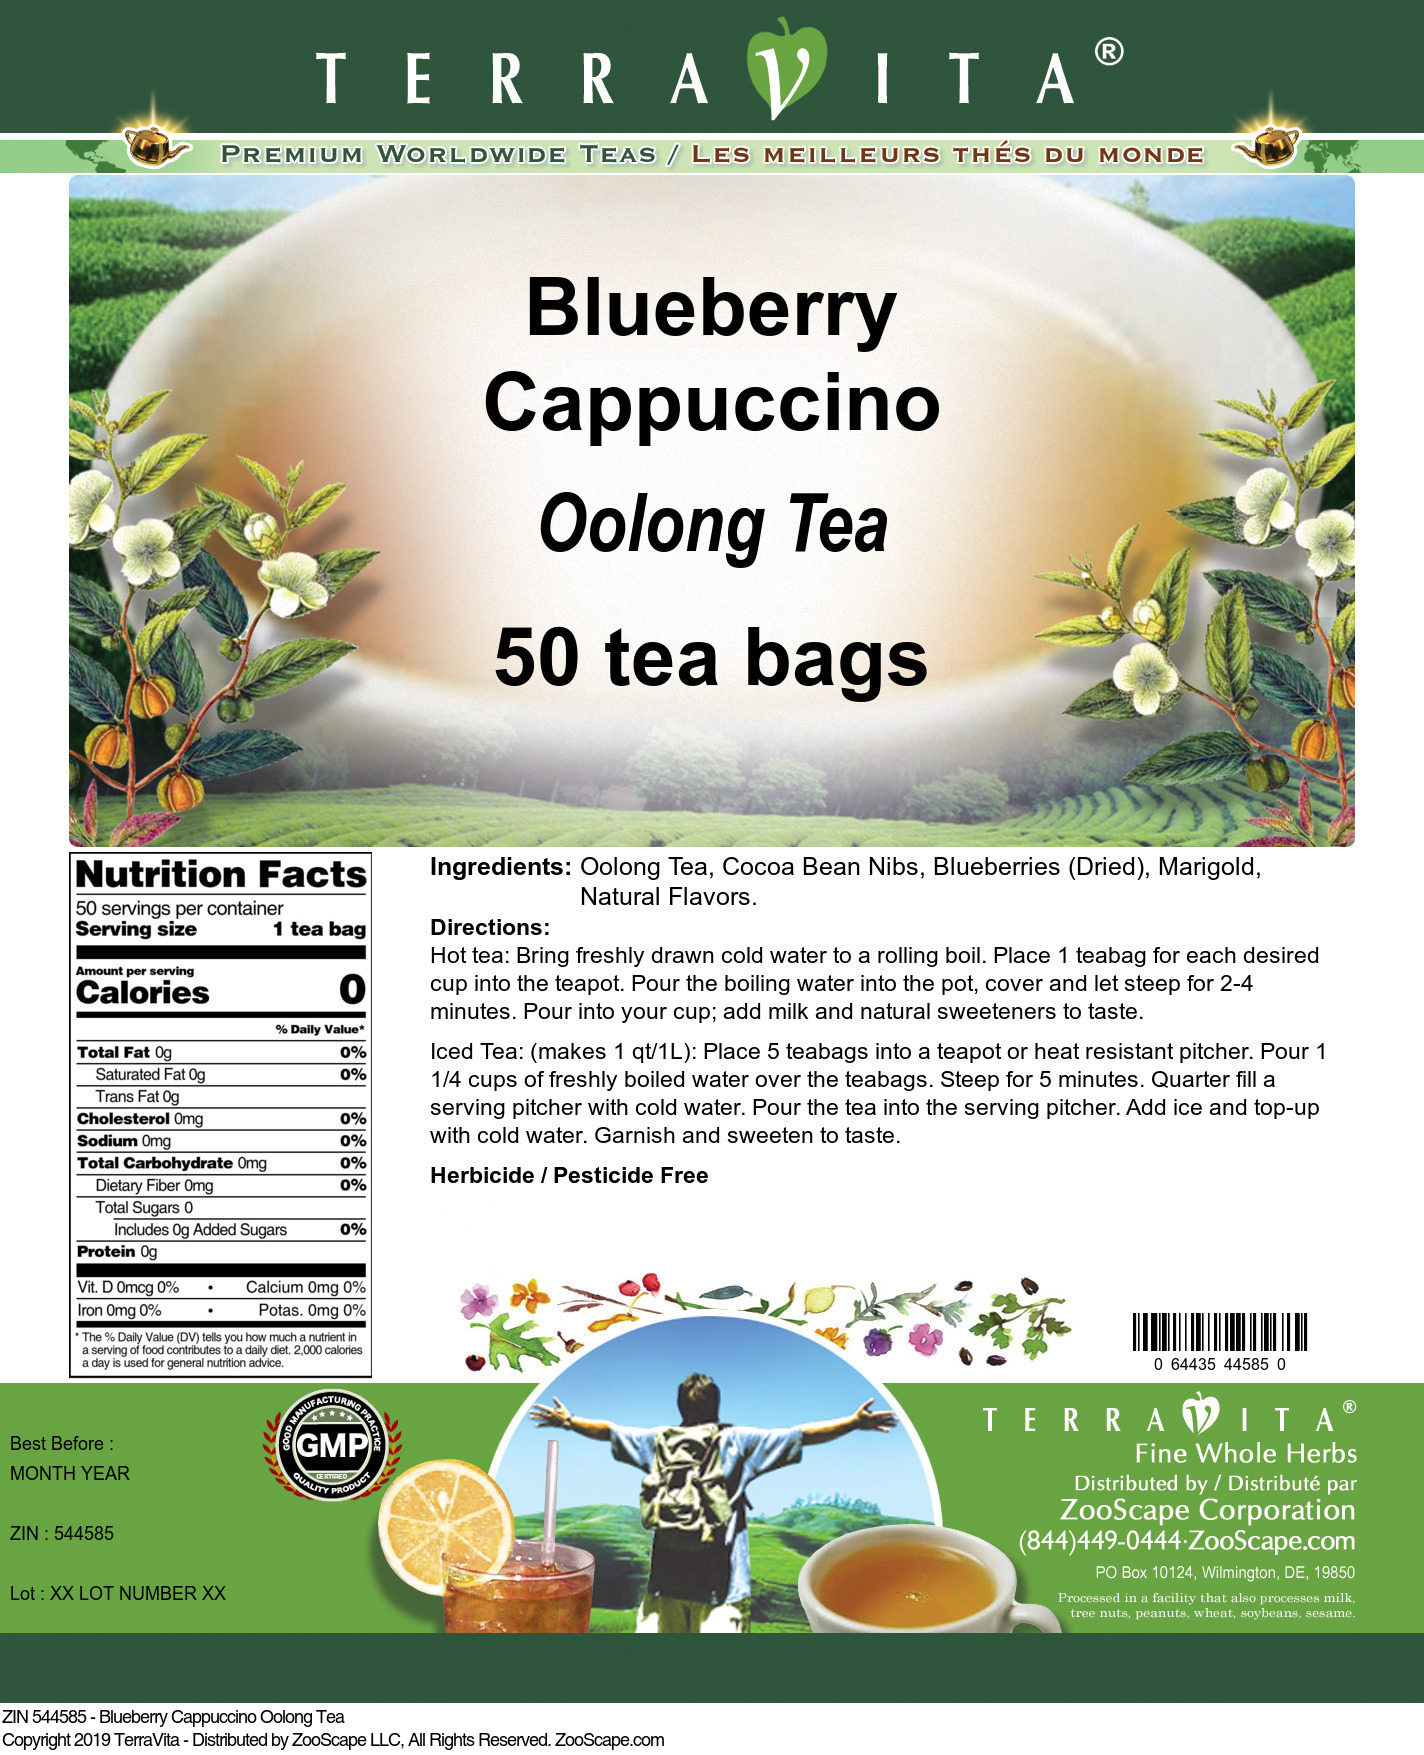 Blueberry Cappuccino Oolong Tea - Label